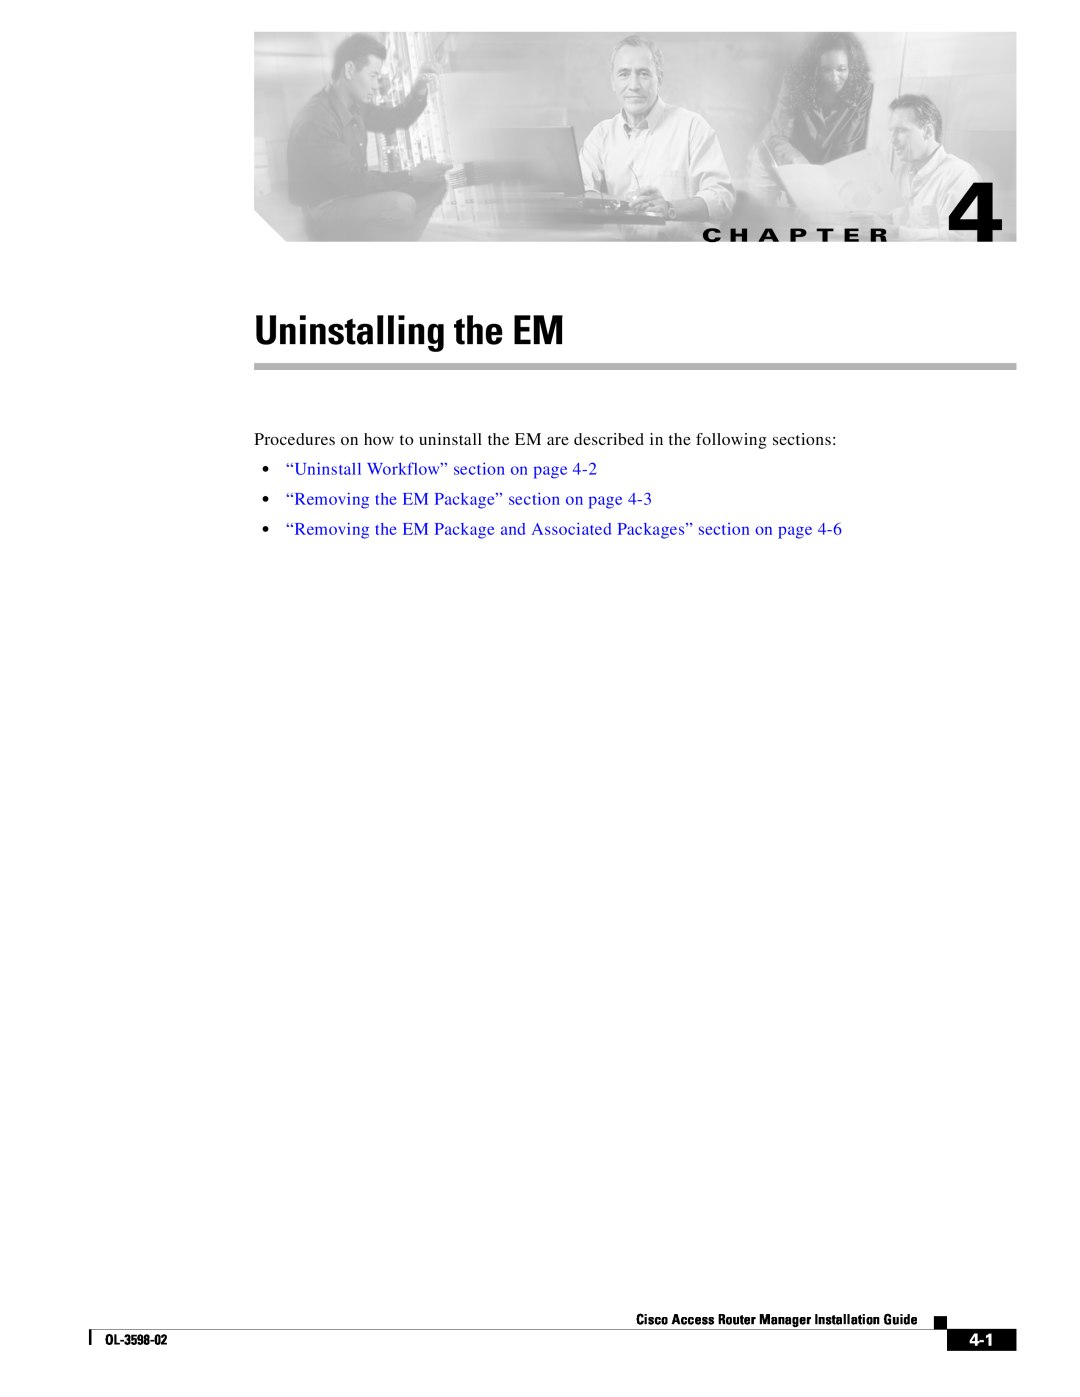 Cisco Systems OL-3598-02 manual Uninstalling the EM, “Uninstall Workflow” section on page, C H A P T E R 